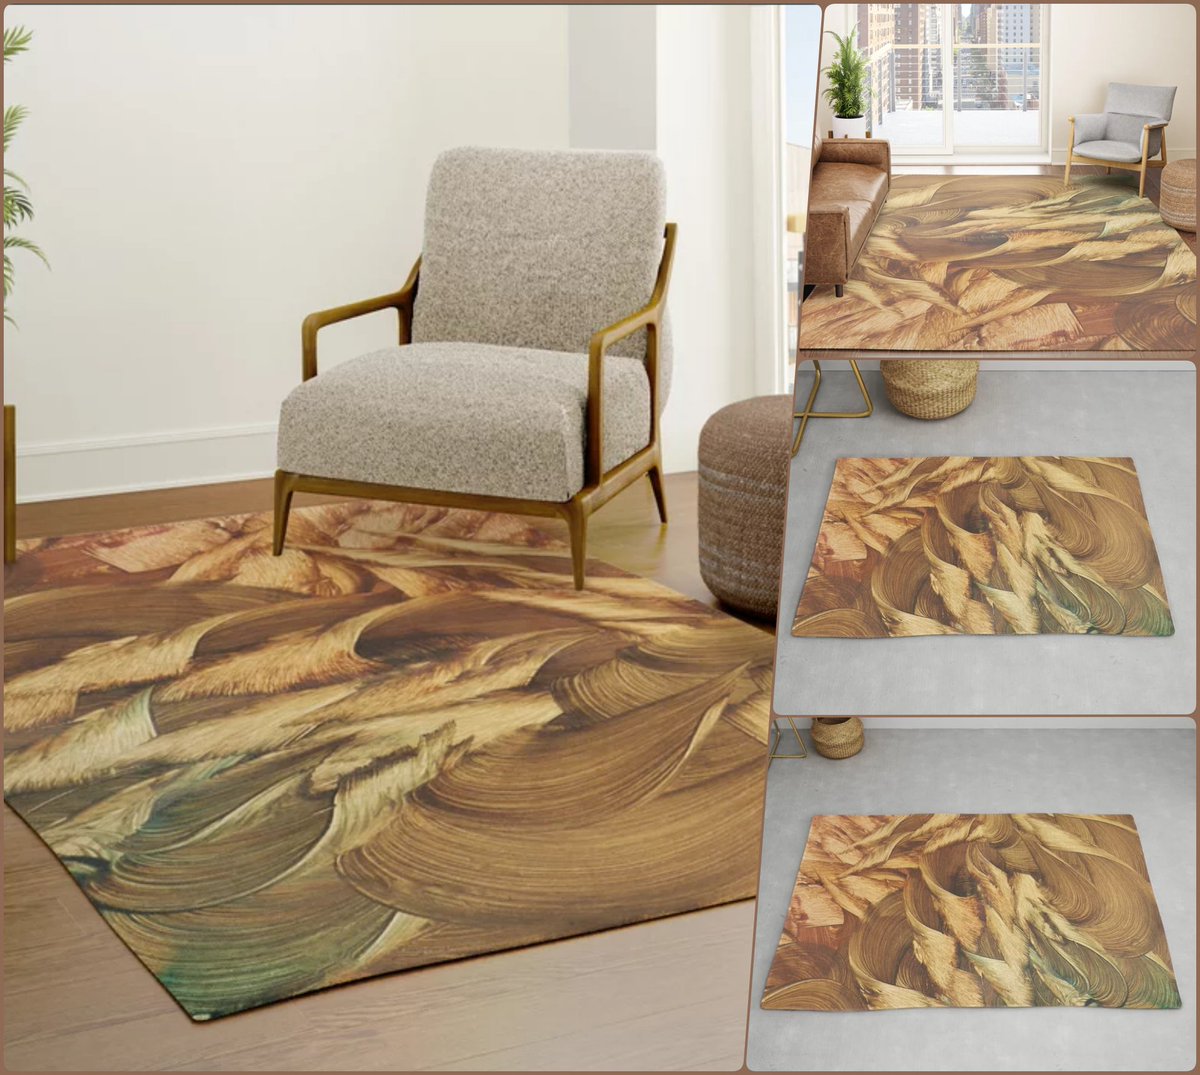 Glorious Beholder Rug~by Art Falaxy
~Exquisite Decor~ #artfalaxy #art #curtains #drapes #homedecor #society6 #Society6max #swirls #accents #sheercurtains #windowtreatments #blackoutcurtains #floorrugs #brown #beige

society6.com/product/glorio…